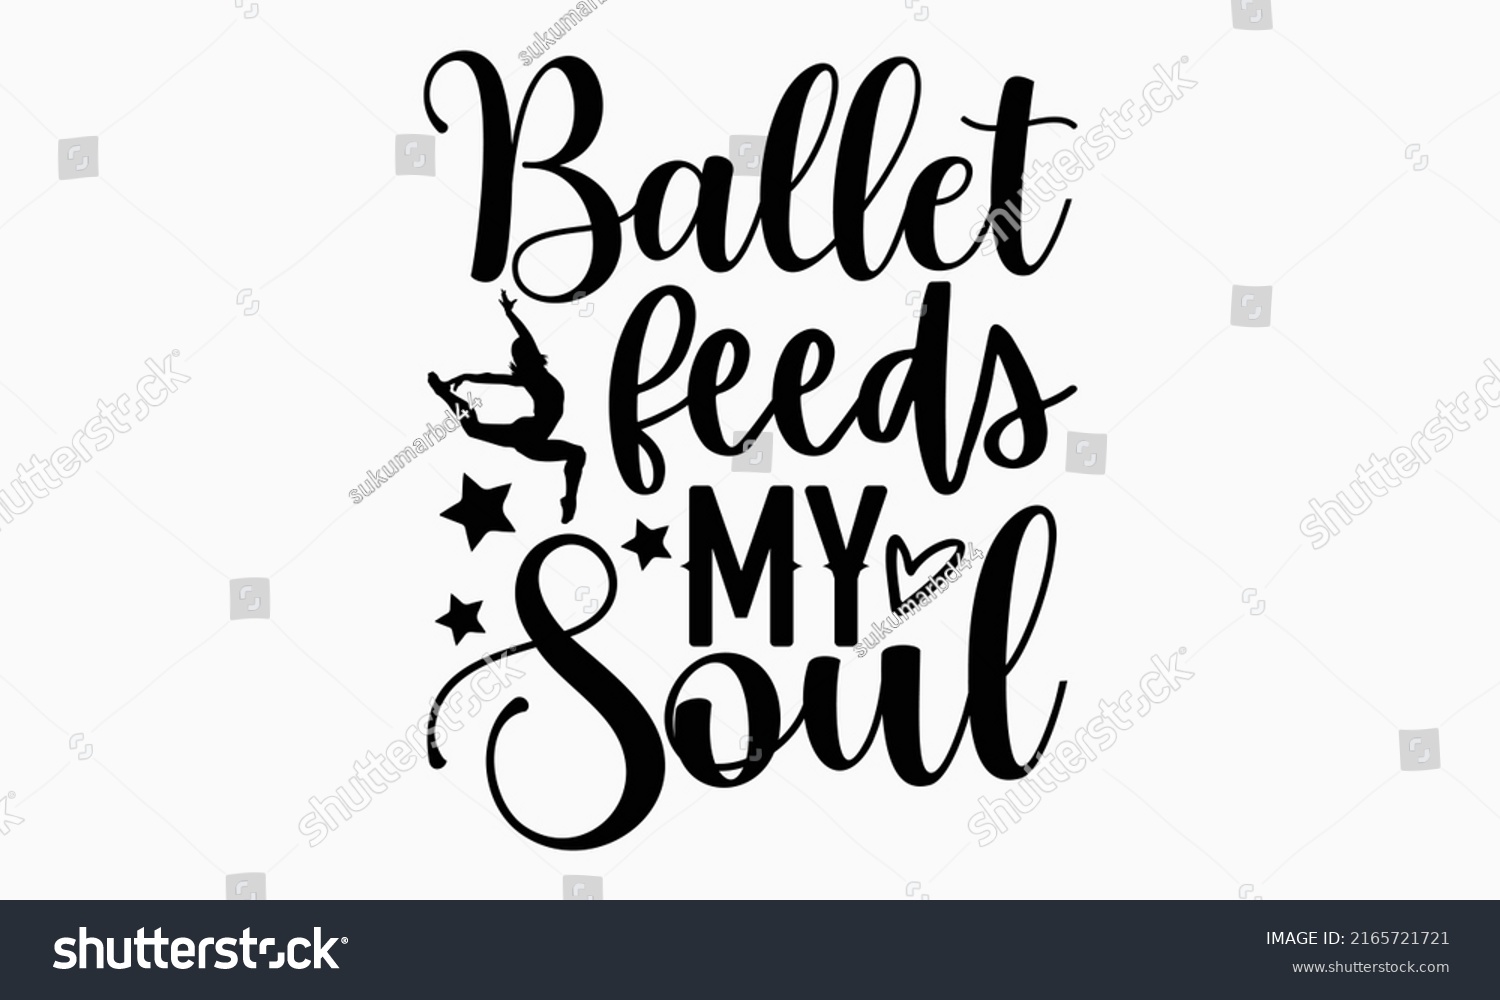 SVG of Ballet feeds my soul - Ballet t shirt design, Hand drawn lettering phrase, Calligraphy graphic design, SVG Files for Cutting Cricut and Silhouette svg